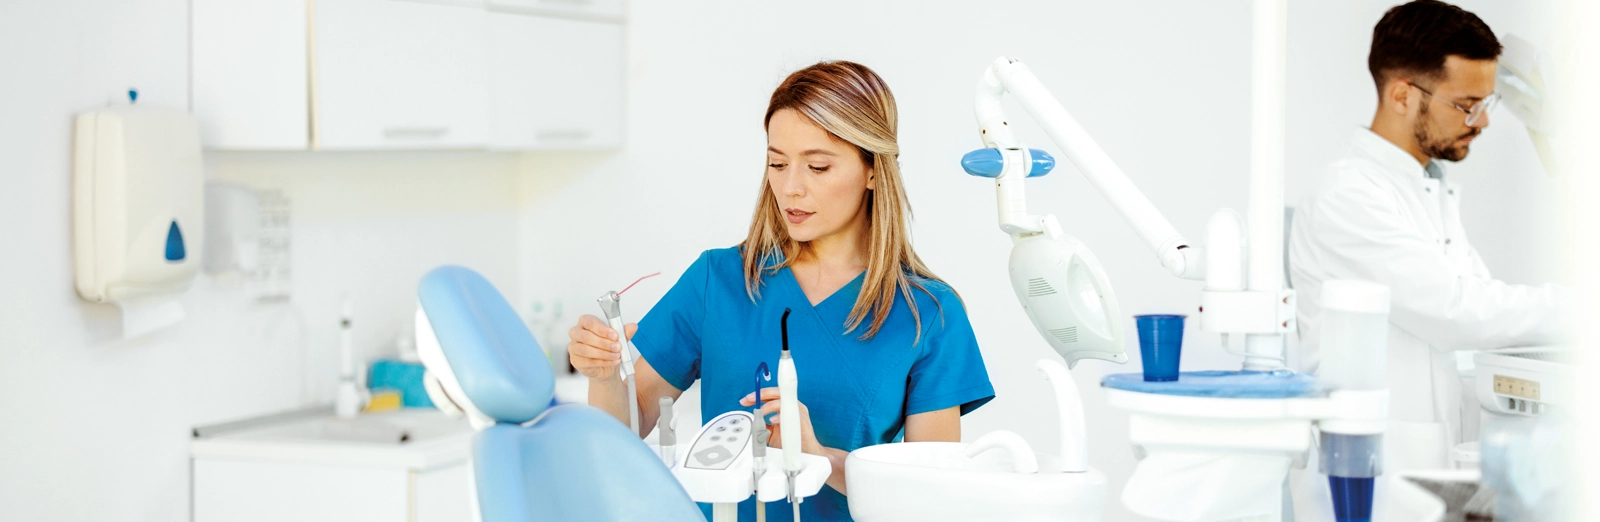 dentist-and-hygienist-prepping-for-appointment-1600x522.webp